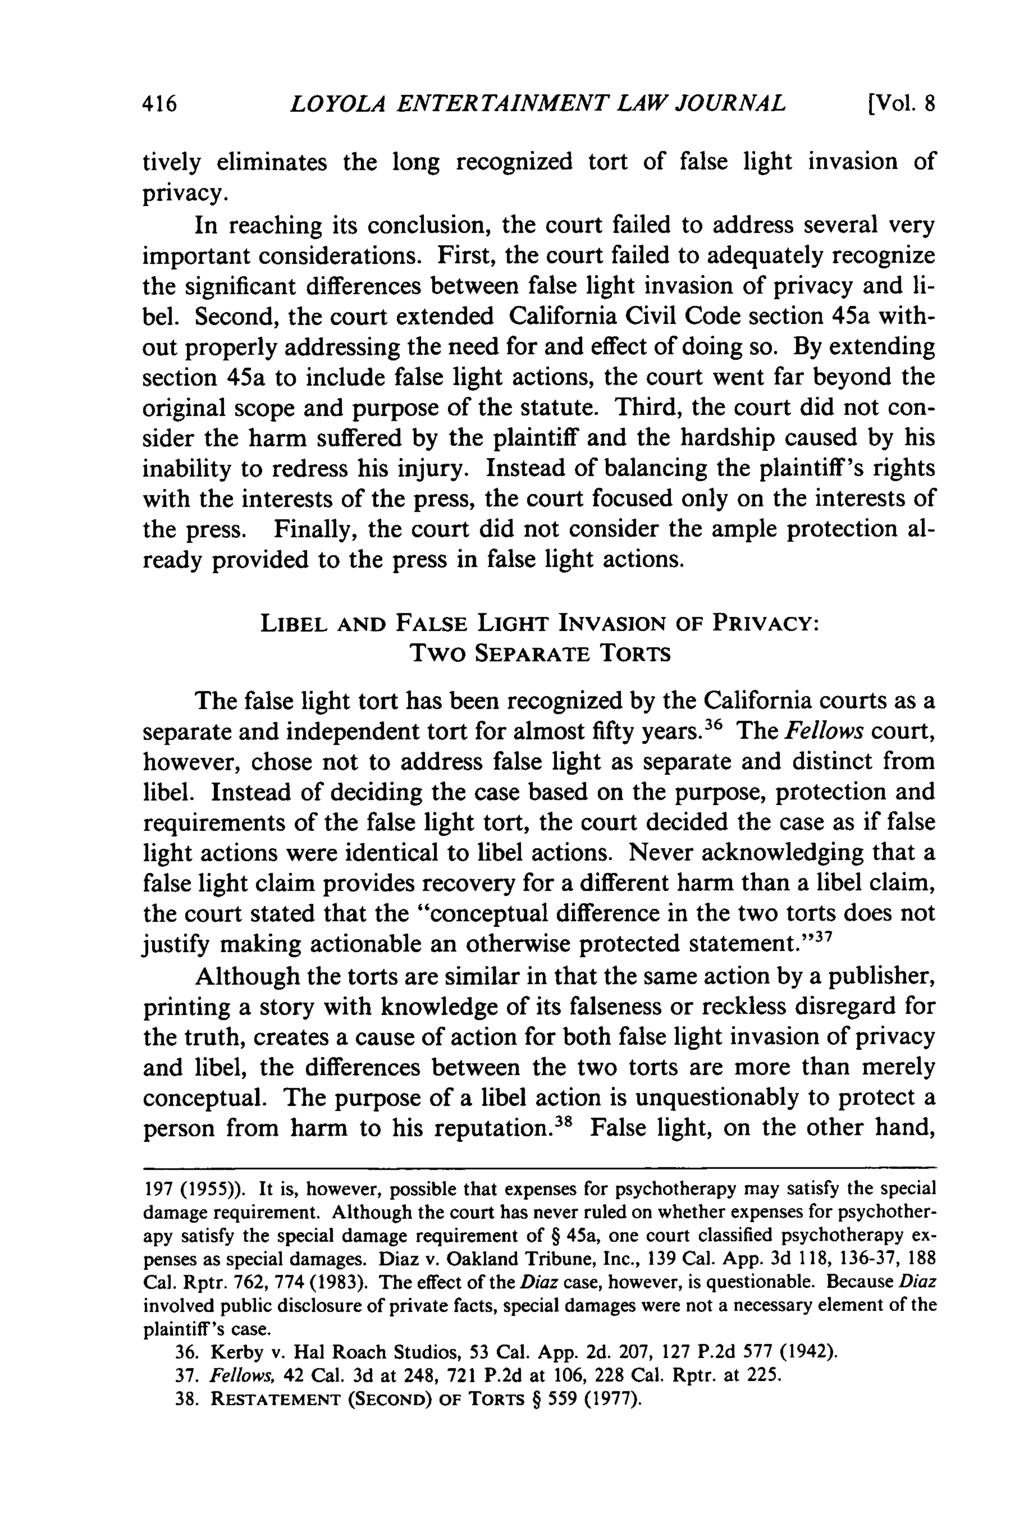 LOYOLA ENTERTAINMENT LAW JOURNAL [Vol. 8 tively eliminates the long recognized tort of false light invasion of privacy.